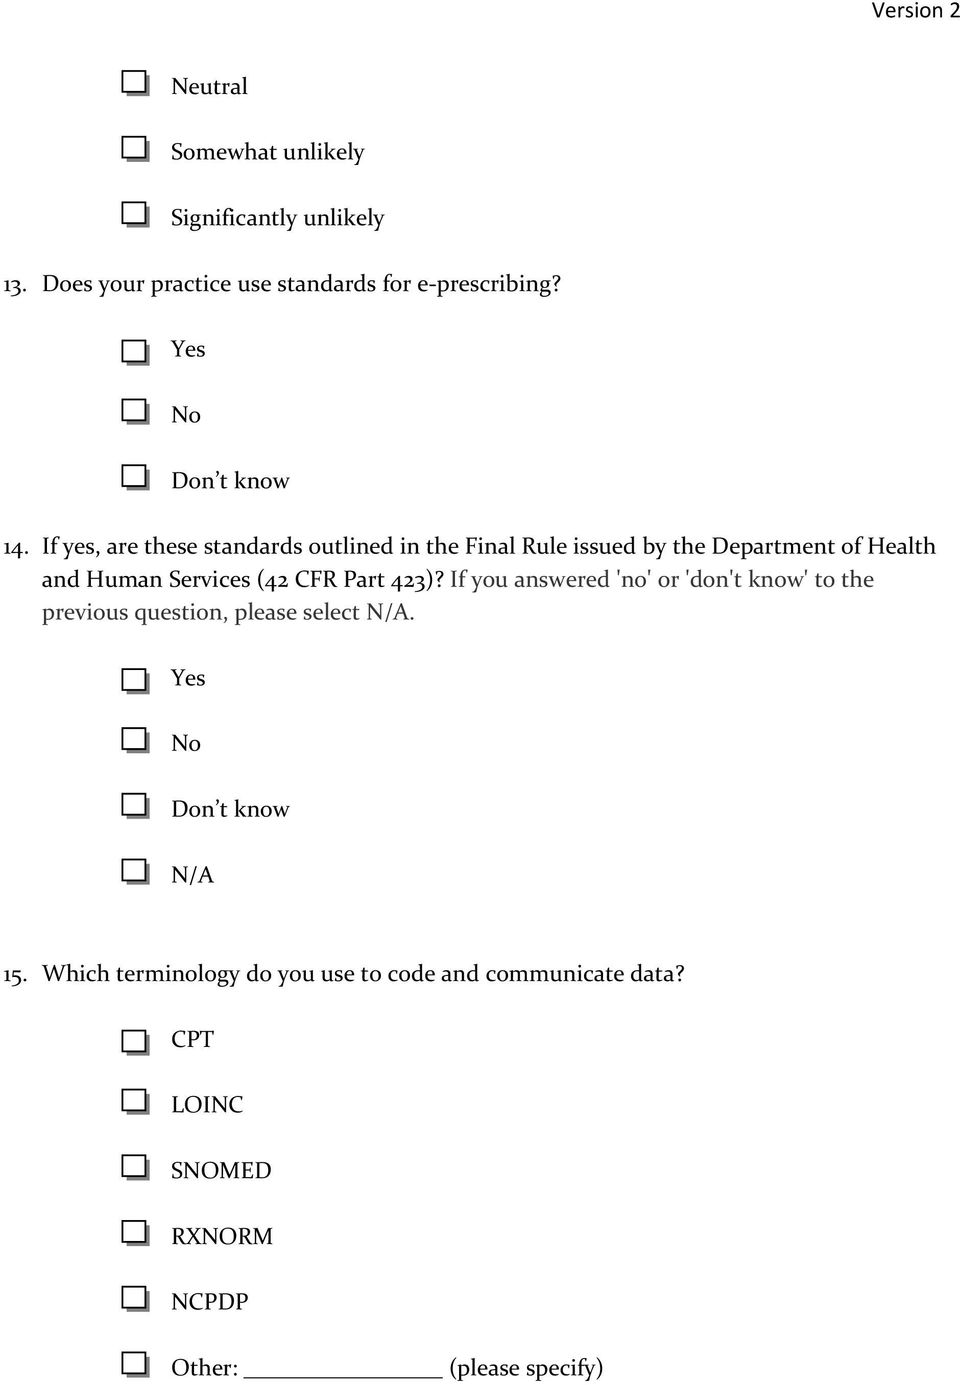 If yes, are these standards outlined in the Final Rule issued by the Department of Health and Human Services (42 CFR